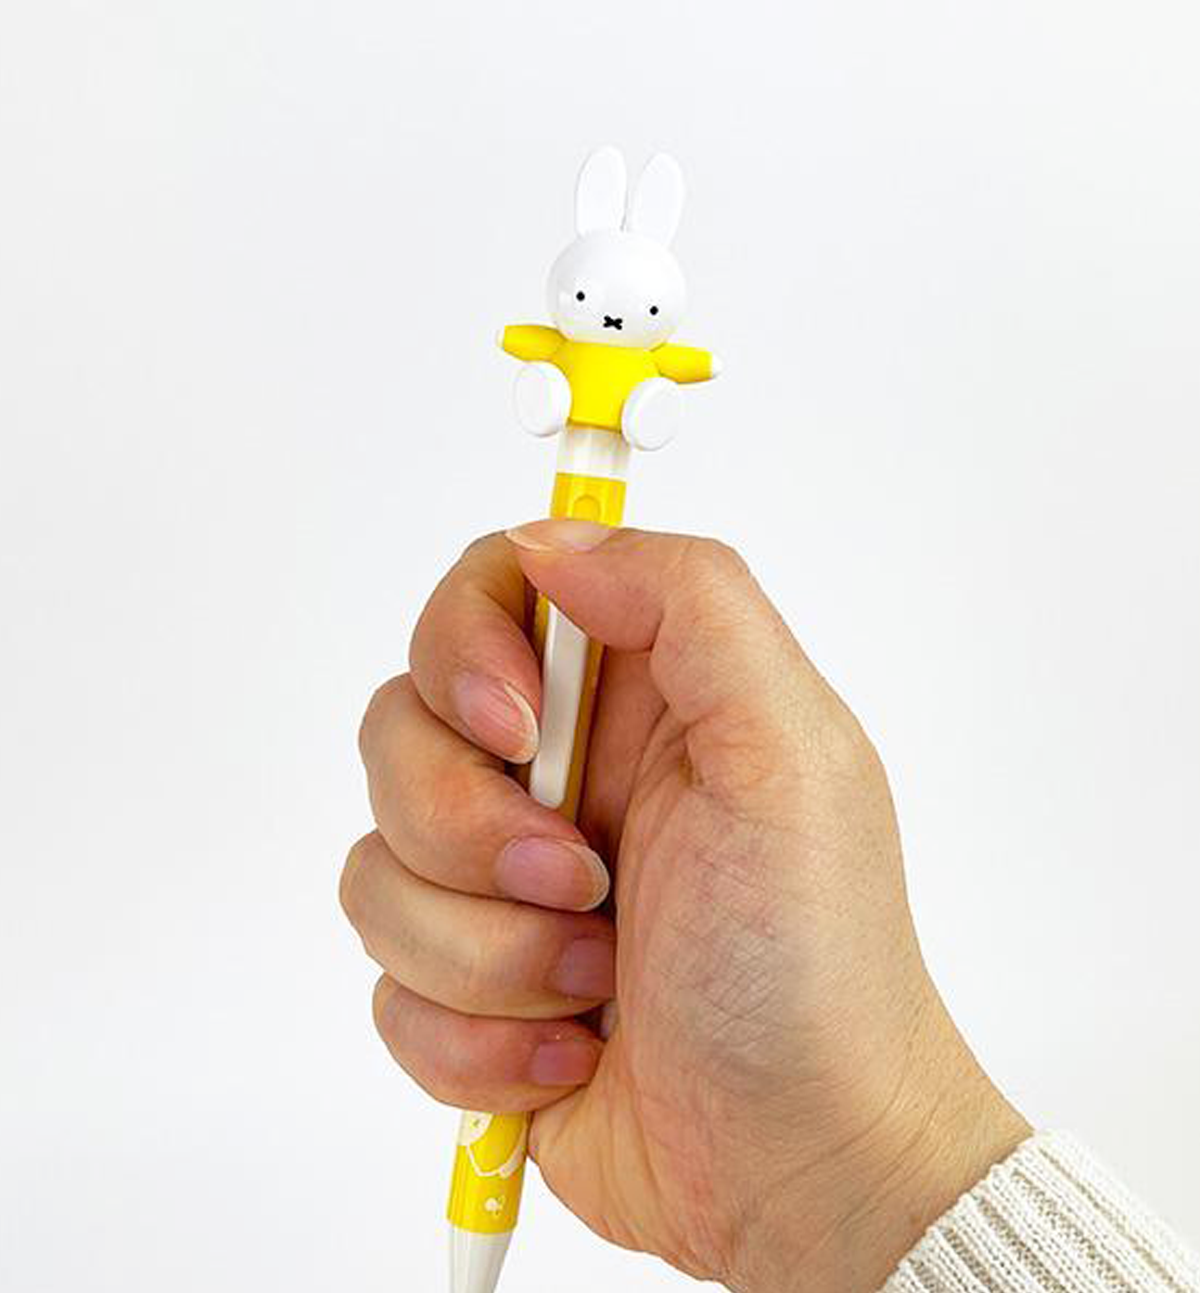 Miffy Action 0.7mm Pen [Yellow]